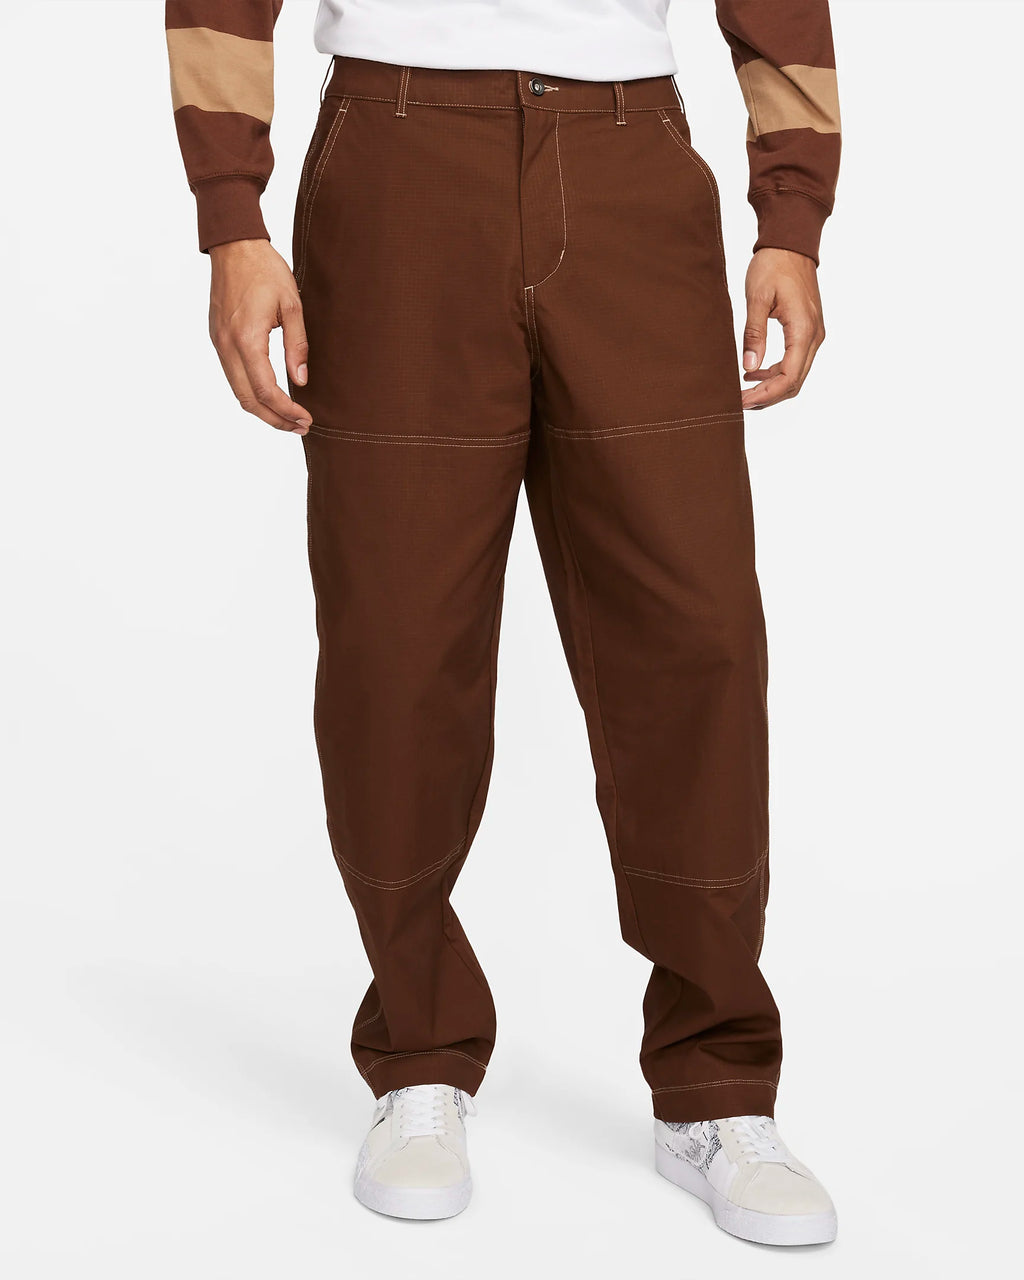 Nike SB Double Knee Pant Cacao Wow front view on model